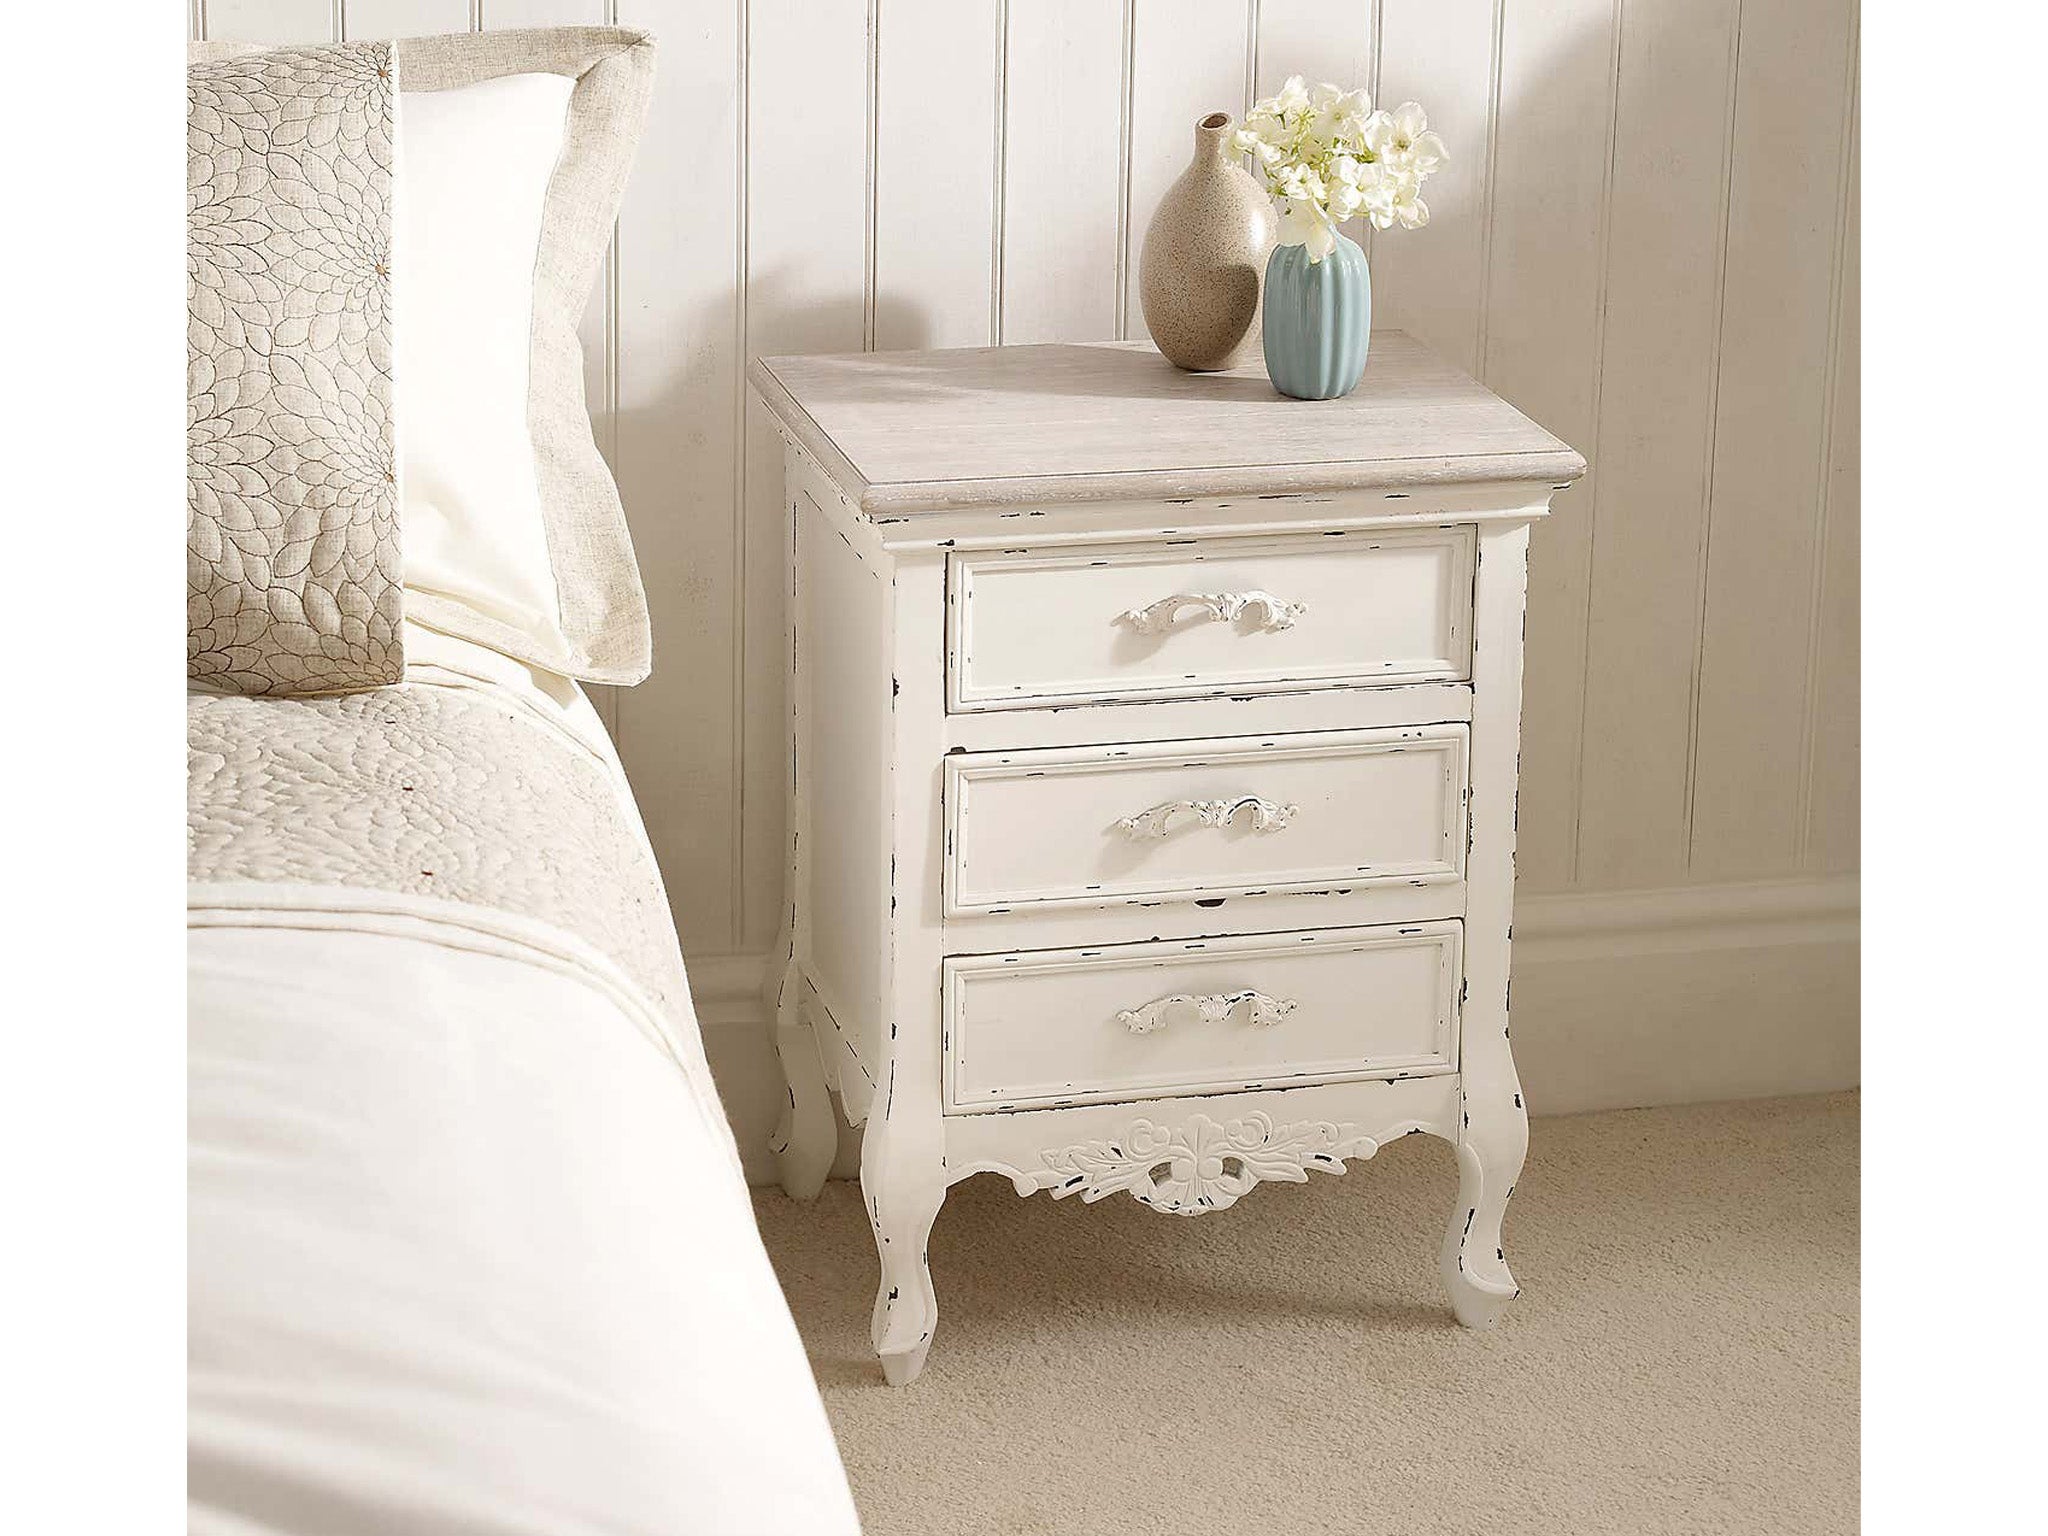 Pair cream bedside table chests French country chic bedroom furniture storage 